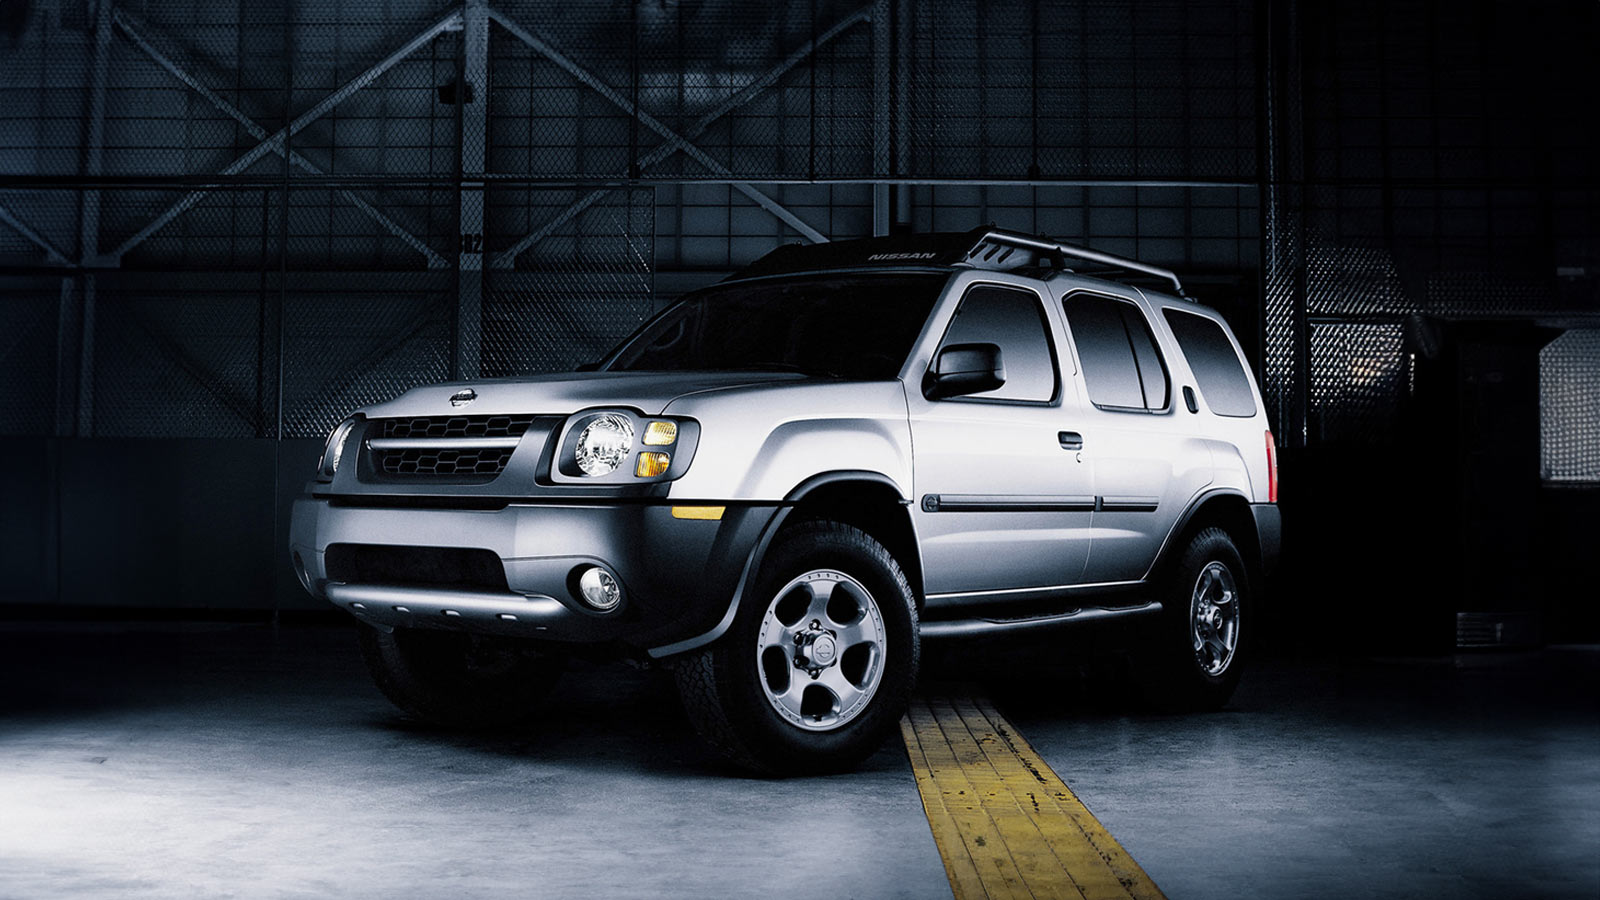 Xterra Parts Your source for the best Nissan Xterra off-road parts & upgrades